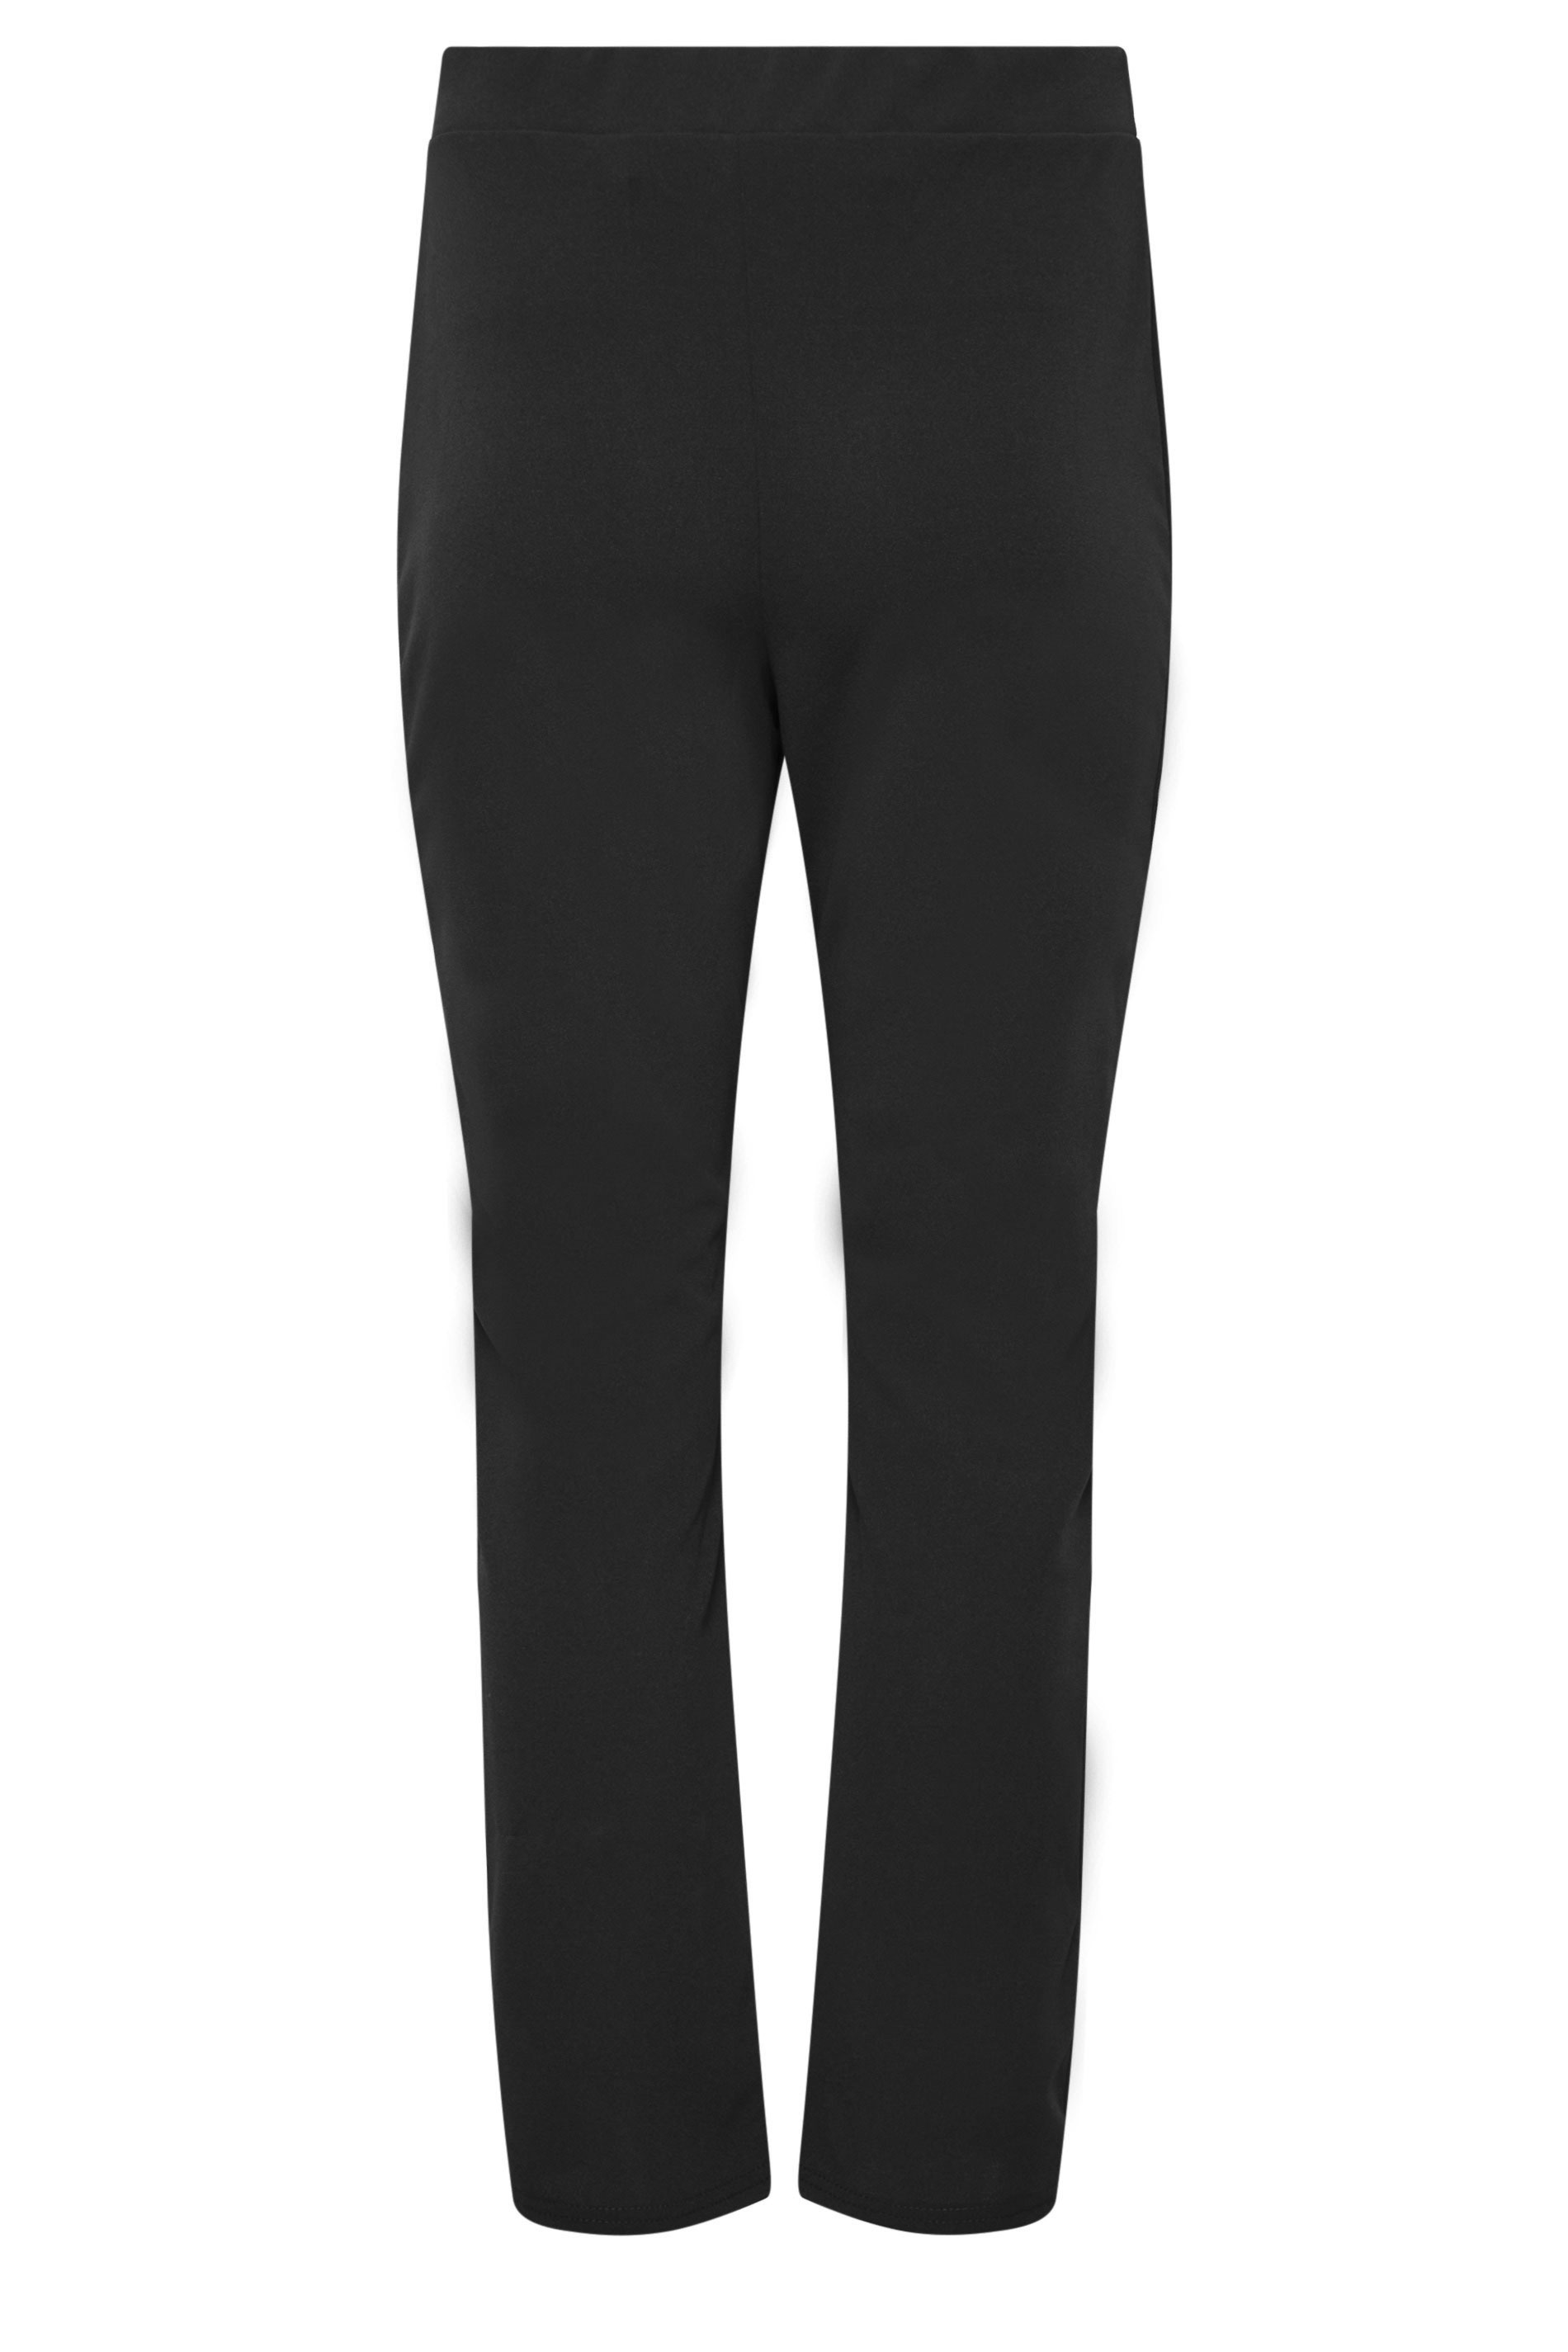 Anna Rose Pull On Ponte Tapered Trousers in Black | Klass